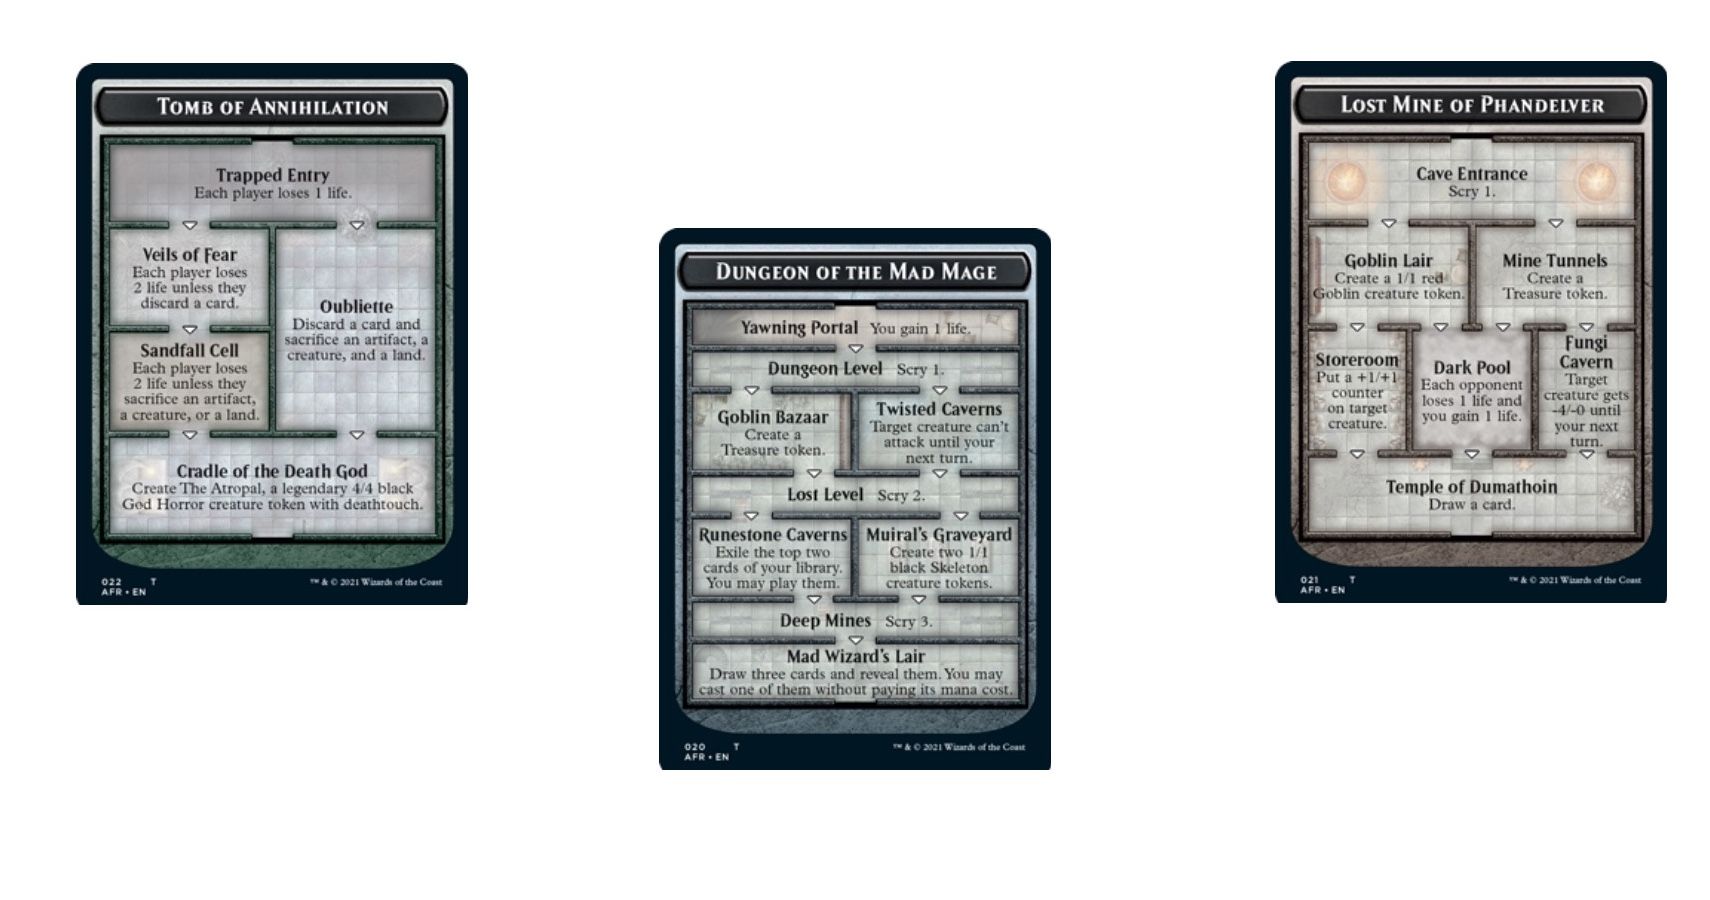 magic-the-gathering-s-d-d-set-comes-with-explorable-dungeons-in-card-form-xenocell